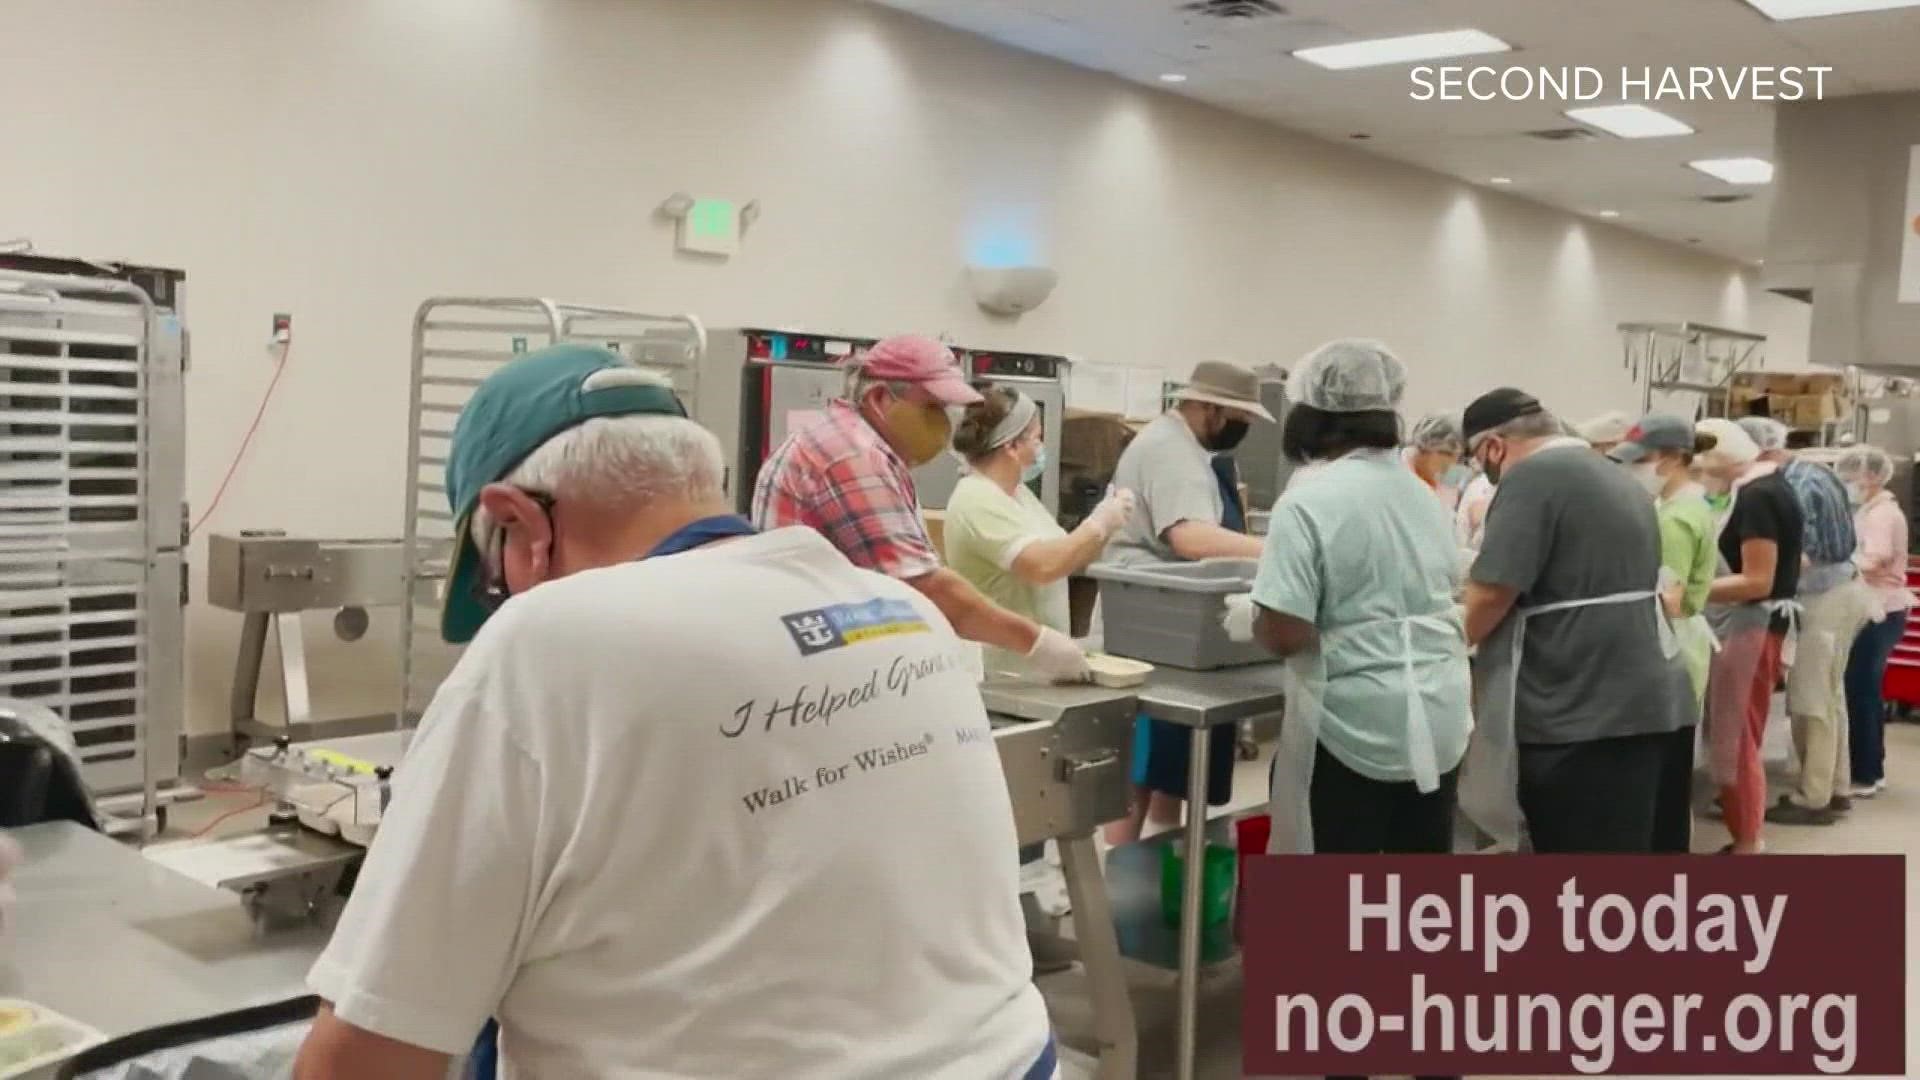 Second Harvest Food Bank is working to get food to people who are struggling after Hurricane Ida